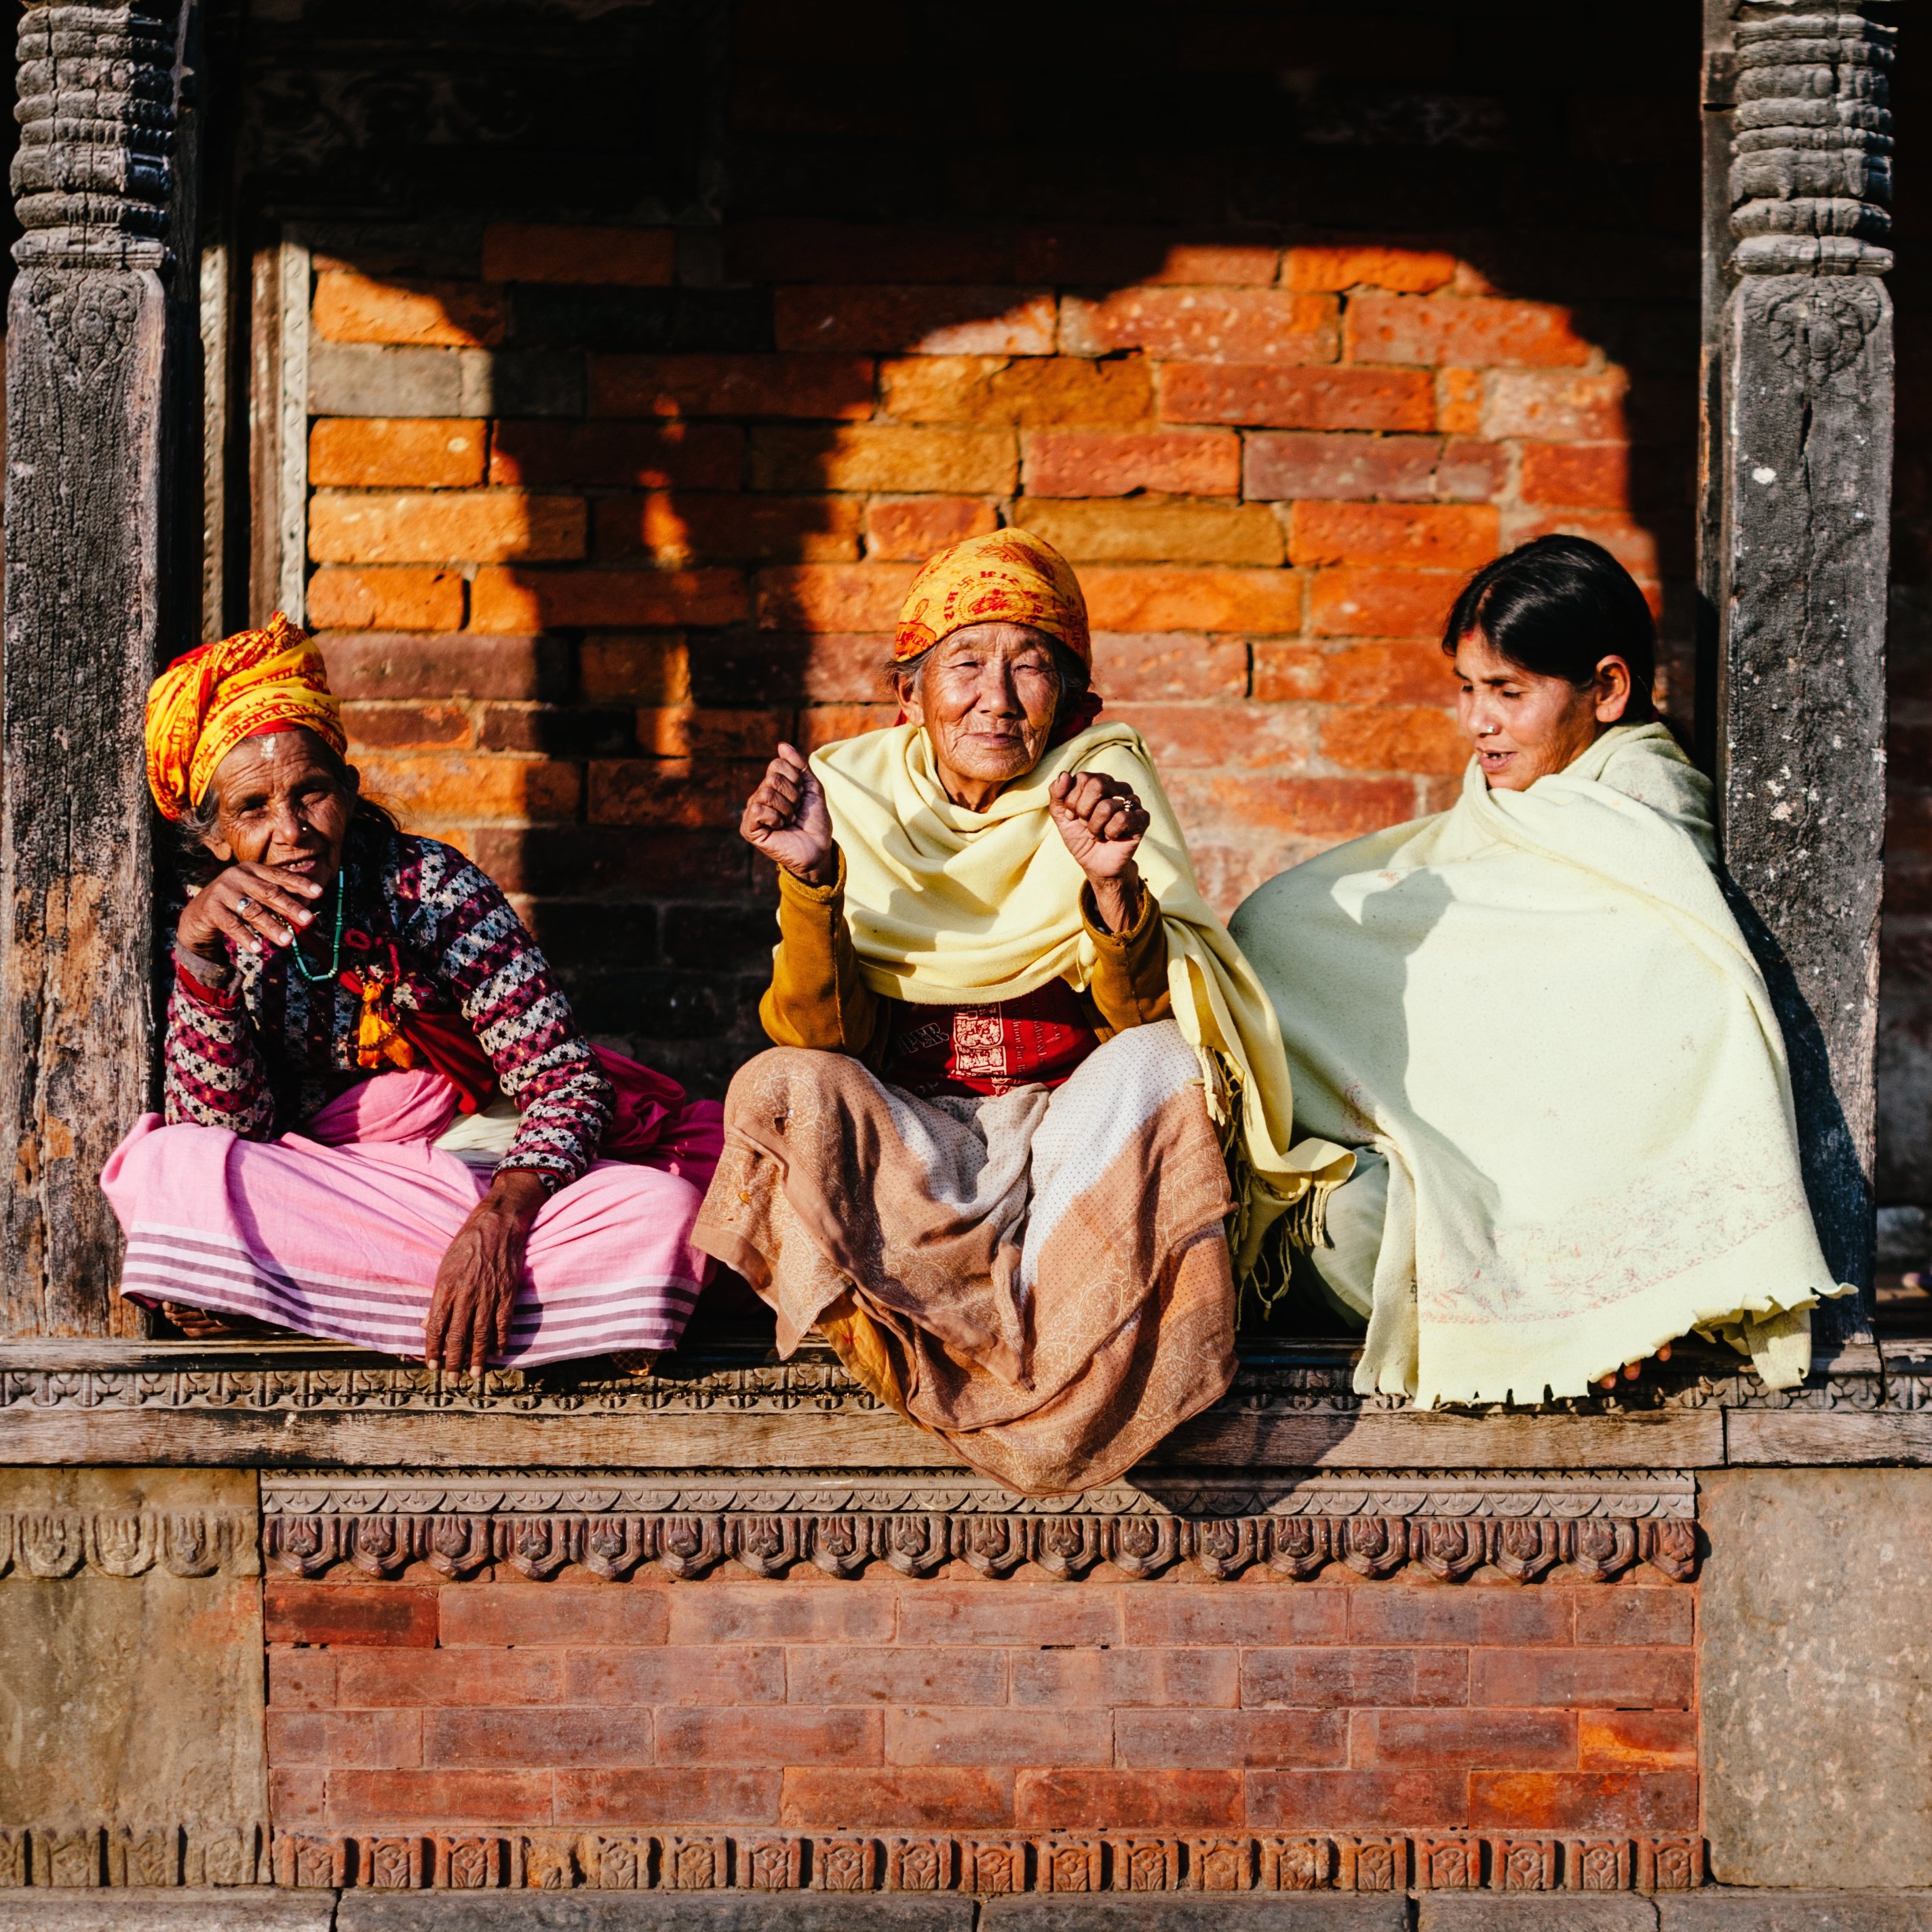 Women sitting on a building